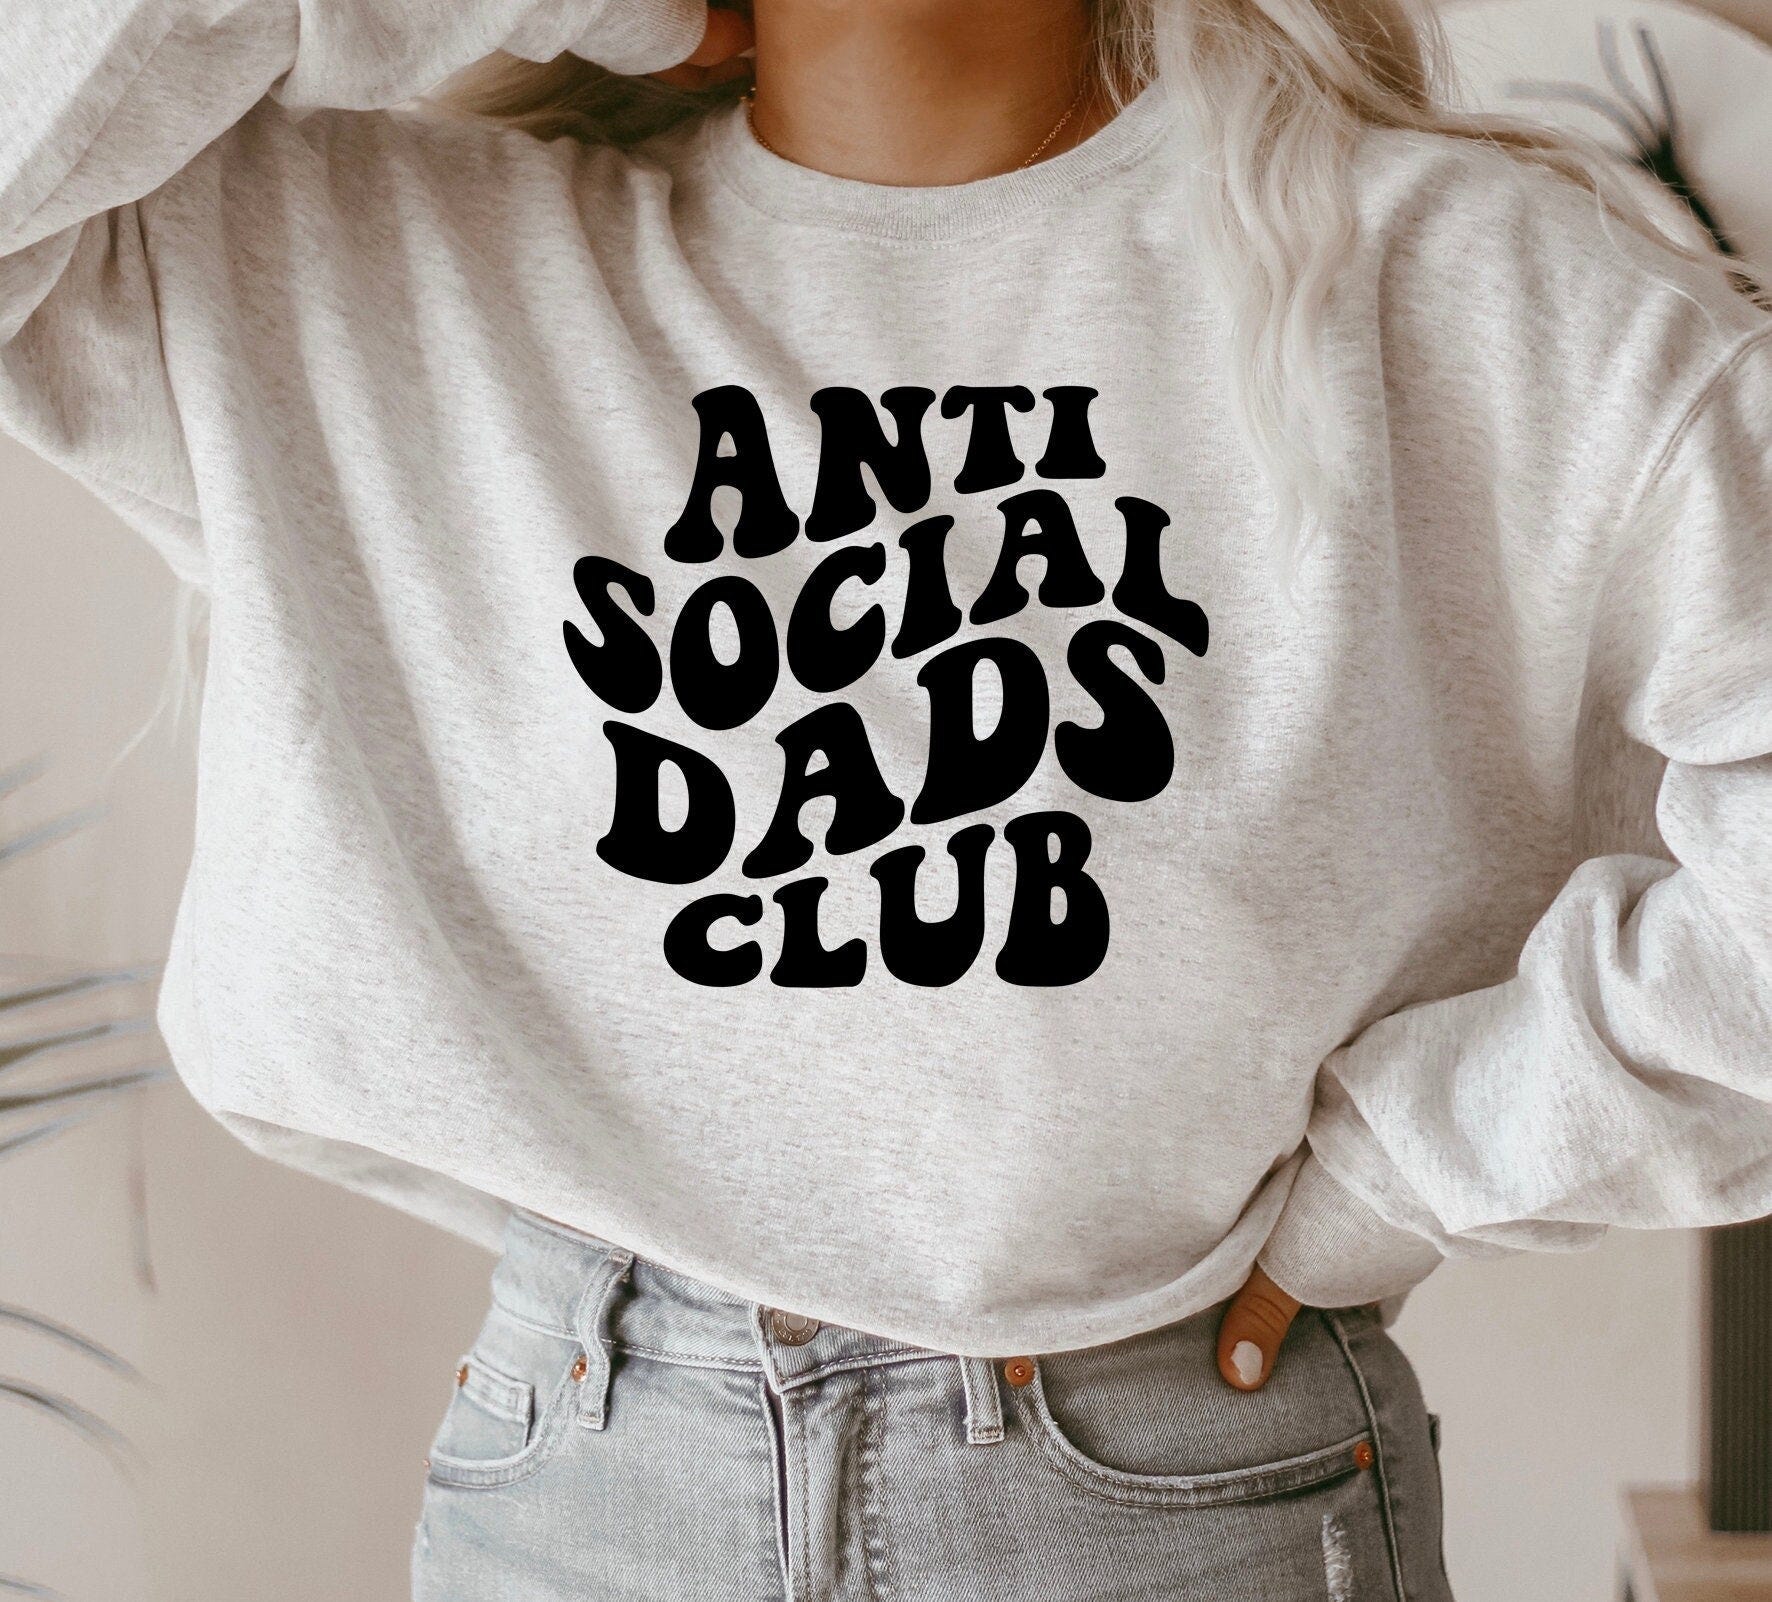 Antisocial DADS Club Svg, Antisocial Club, Antisocial dad Club SVG, Antisocial, Svg Cricut Cut File, PNG Files | Silhouette Cut Files